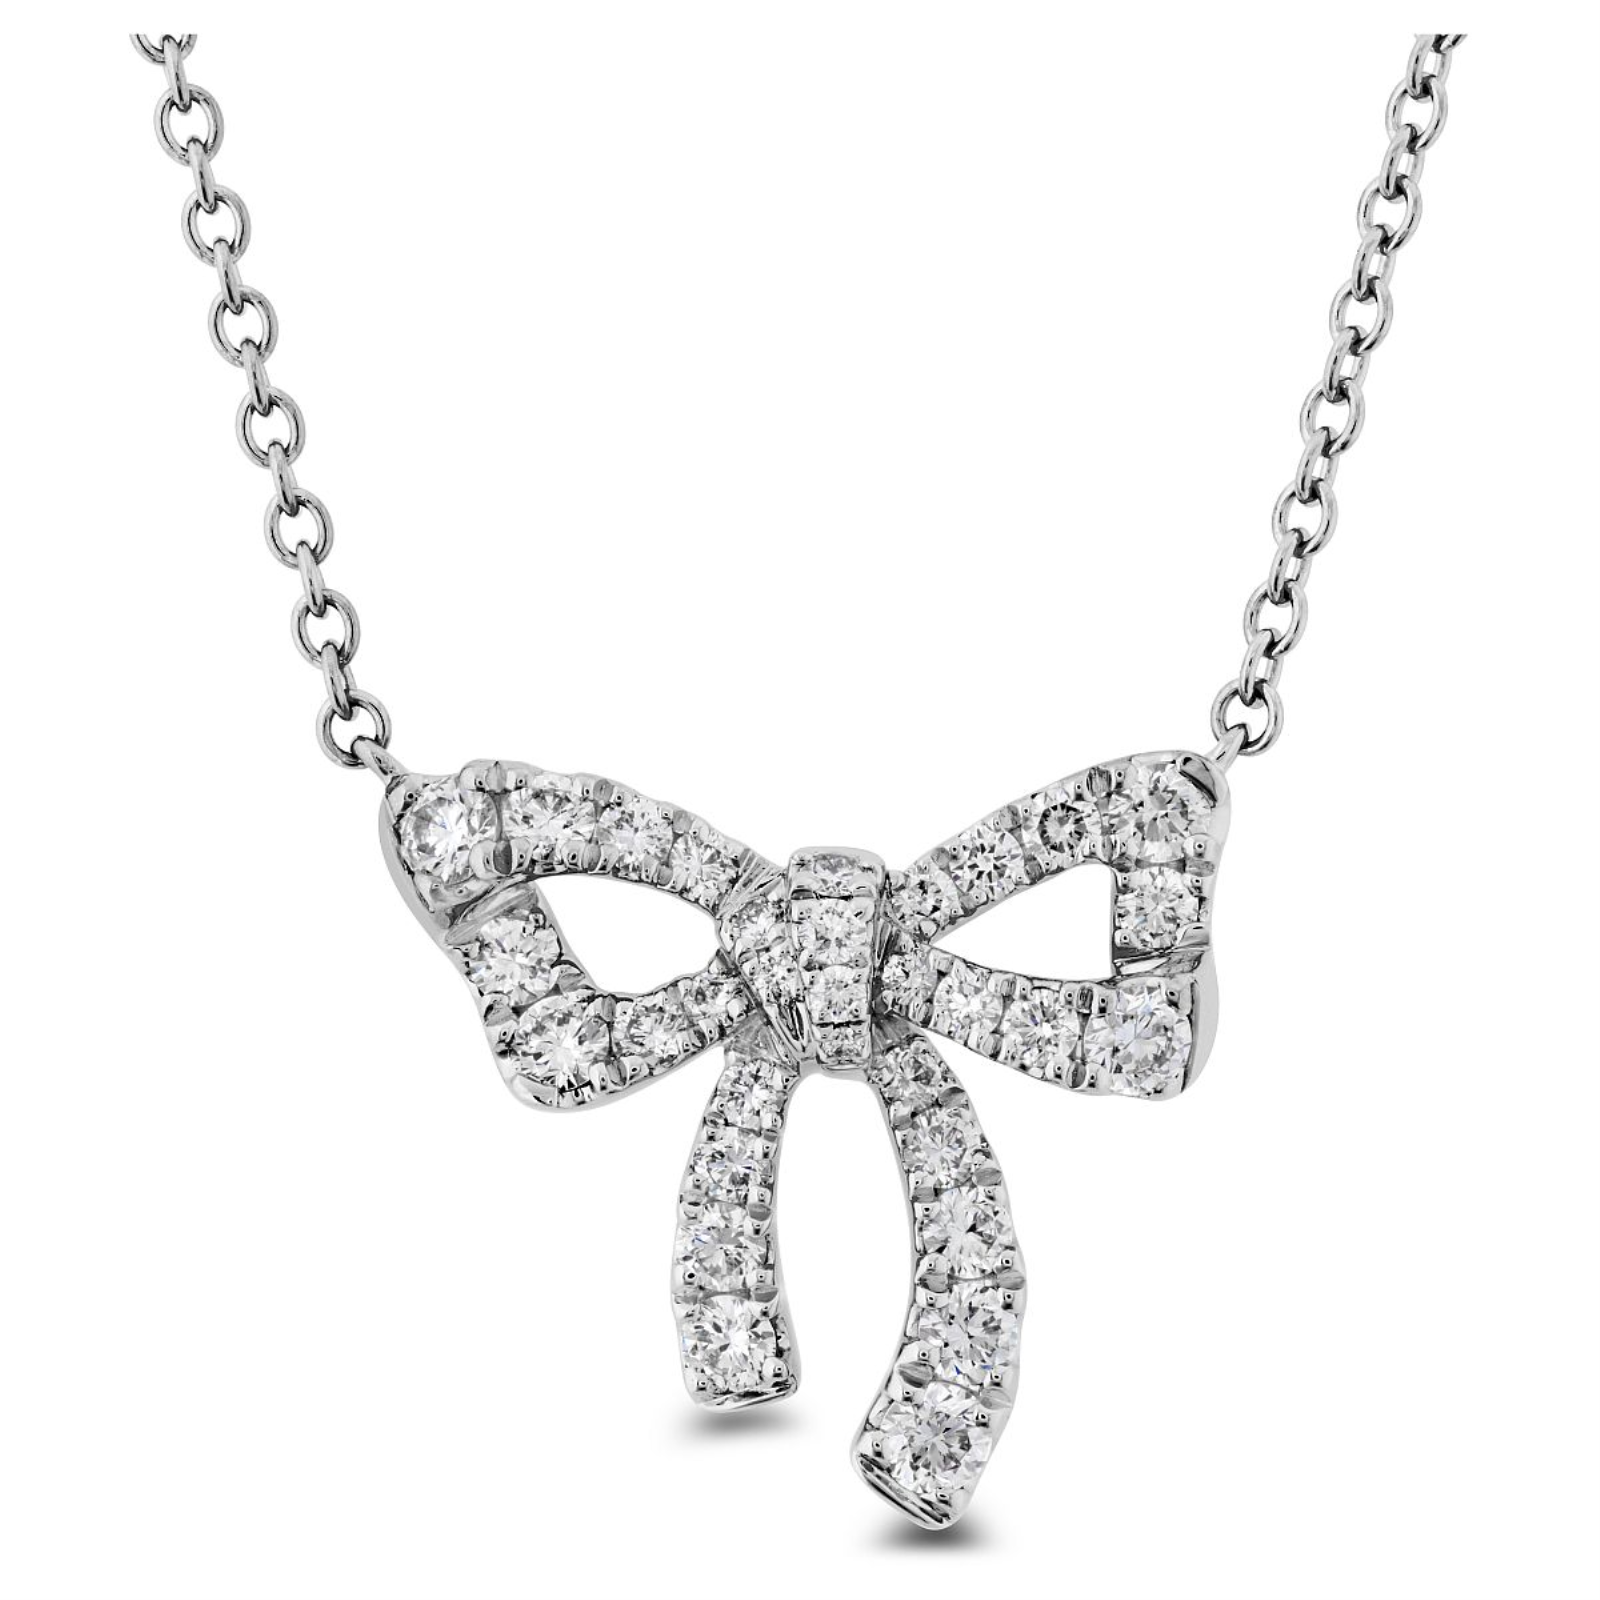 White Gold and Diamond Bow Necklace